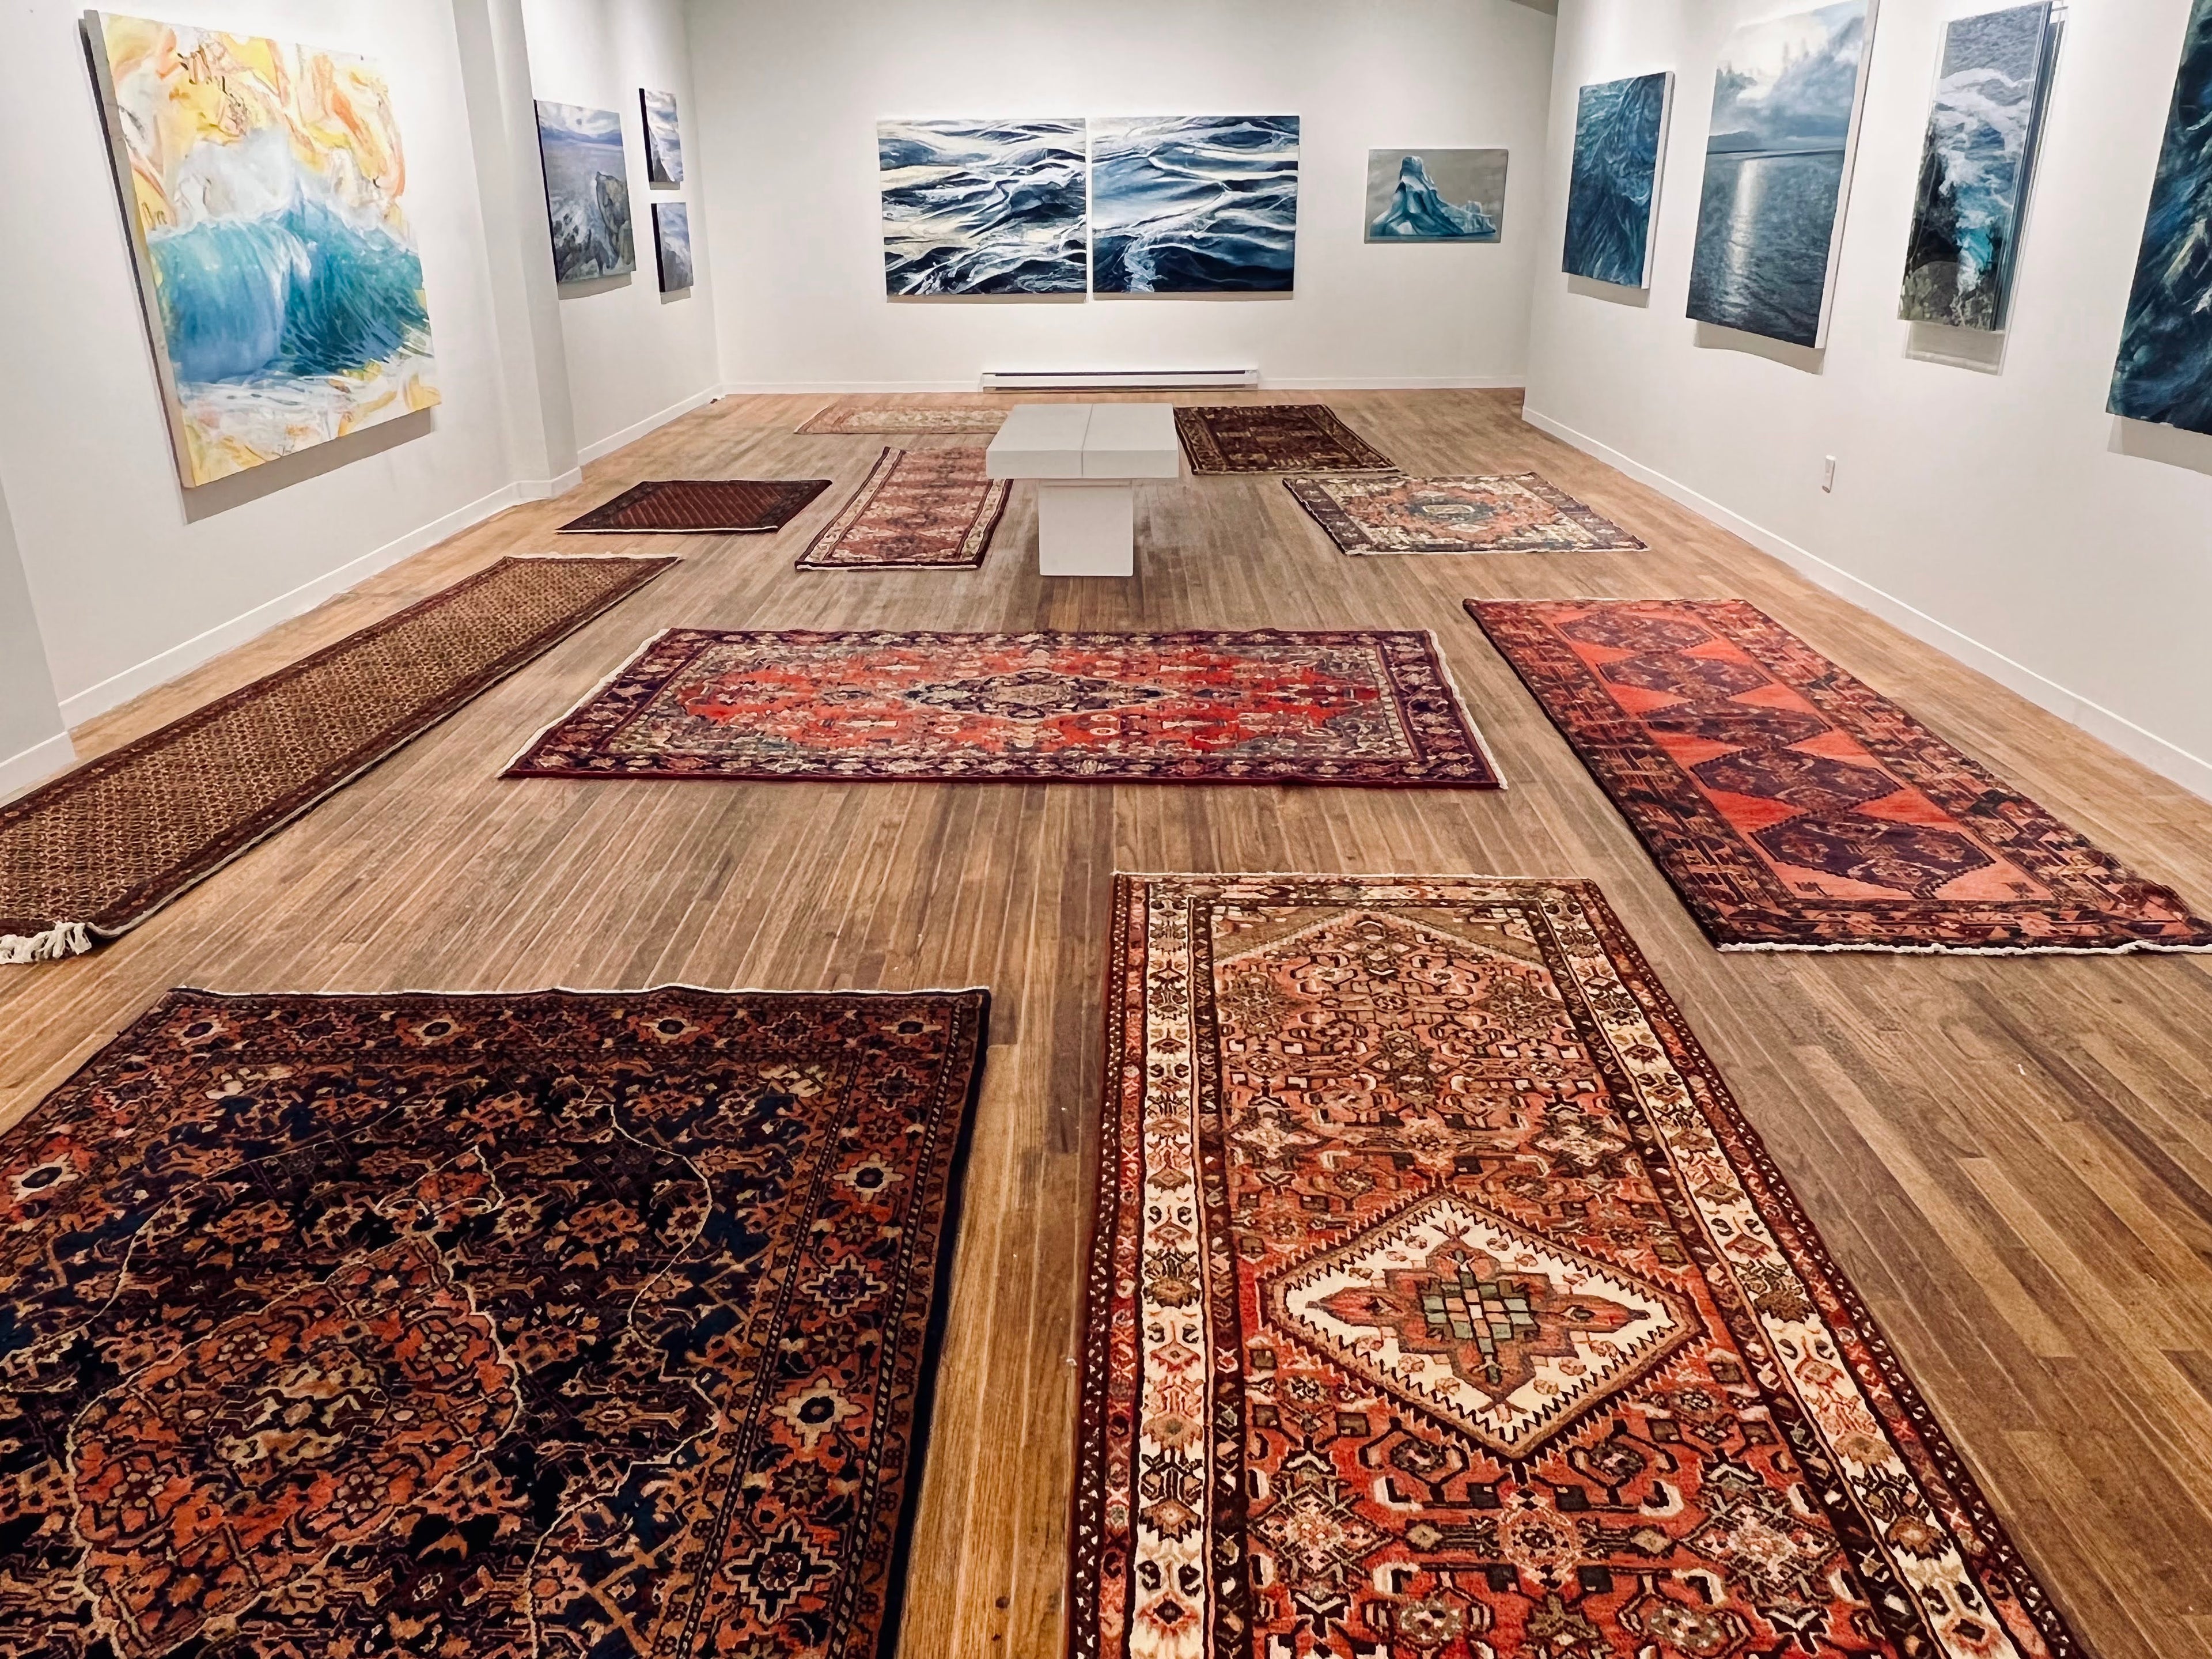 Rug exhibition at James Baird Gallery Pouch Cove